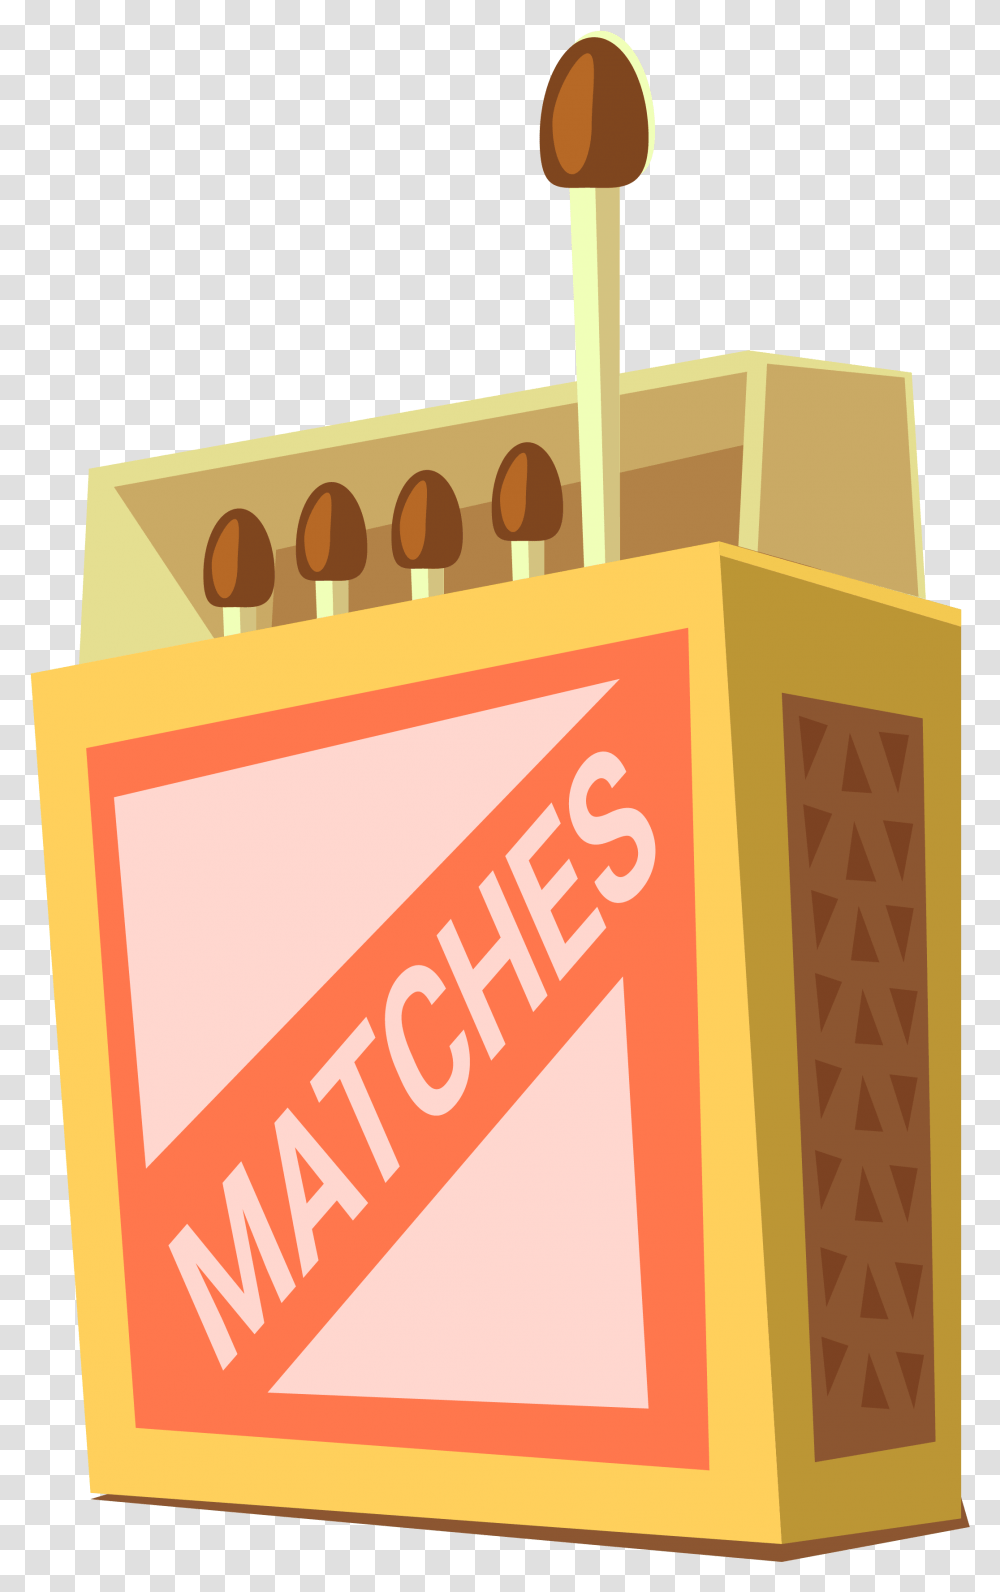 Matches Picture Box Of Matches Cartoon, Building, Architecture, Poster Transparent Png